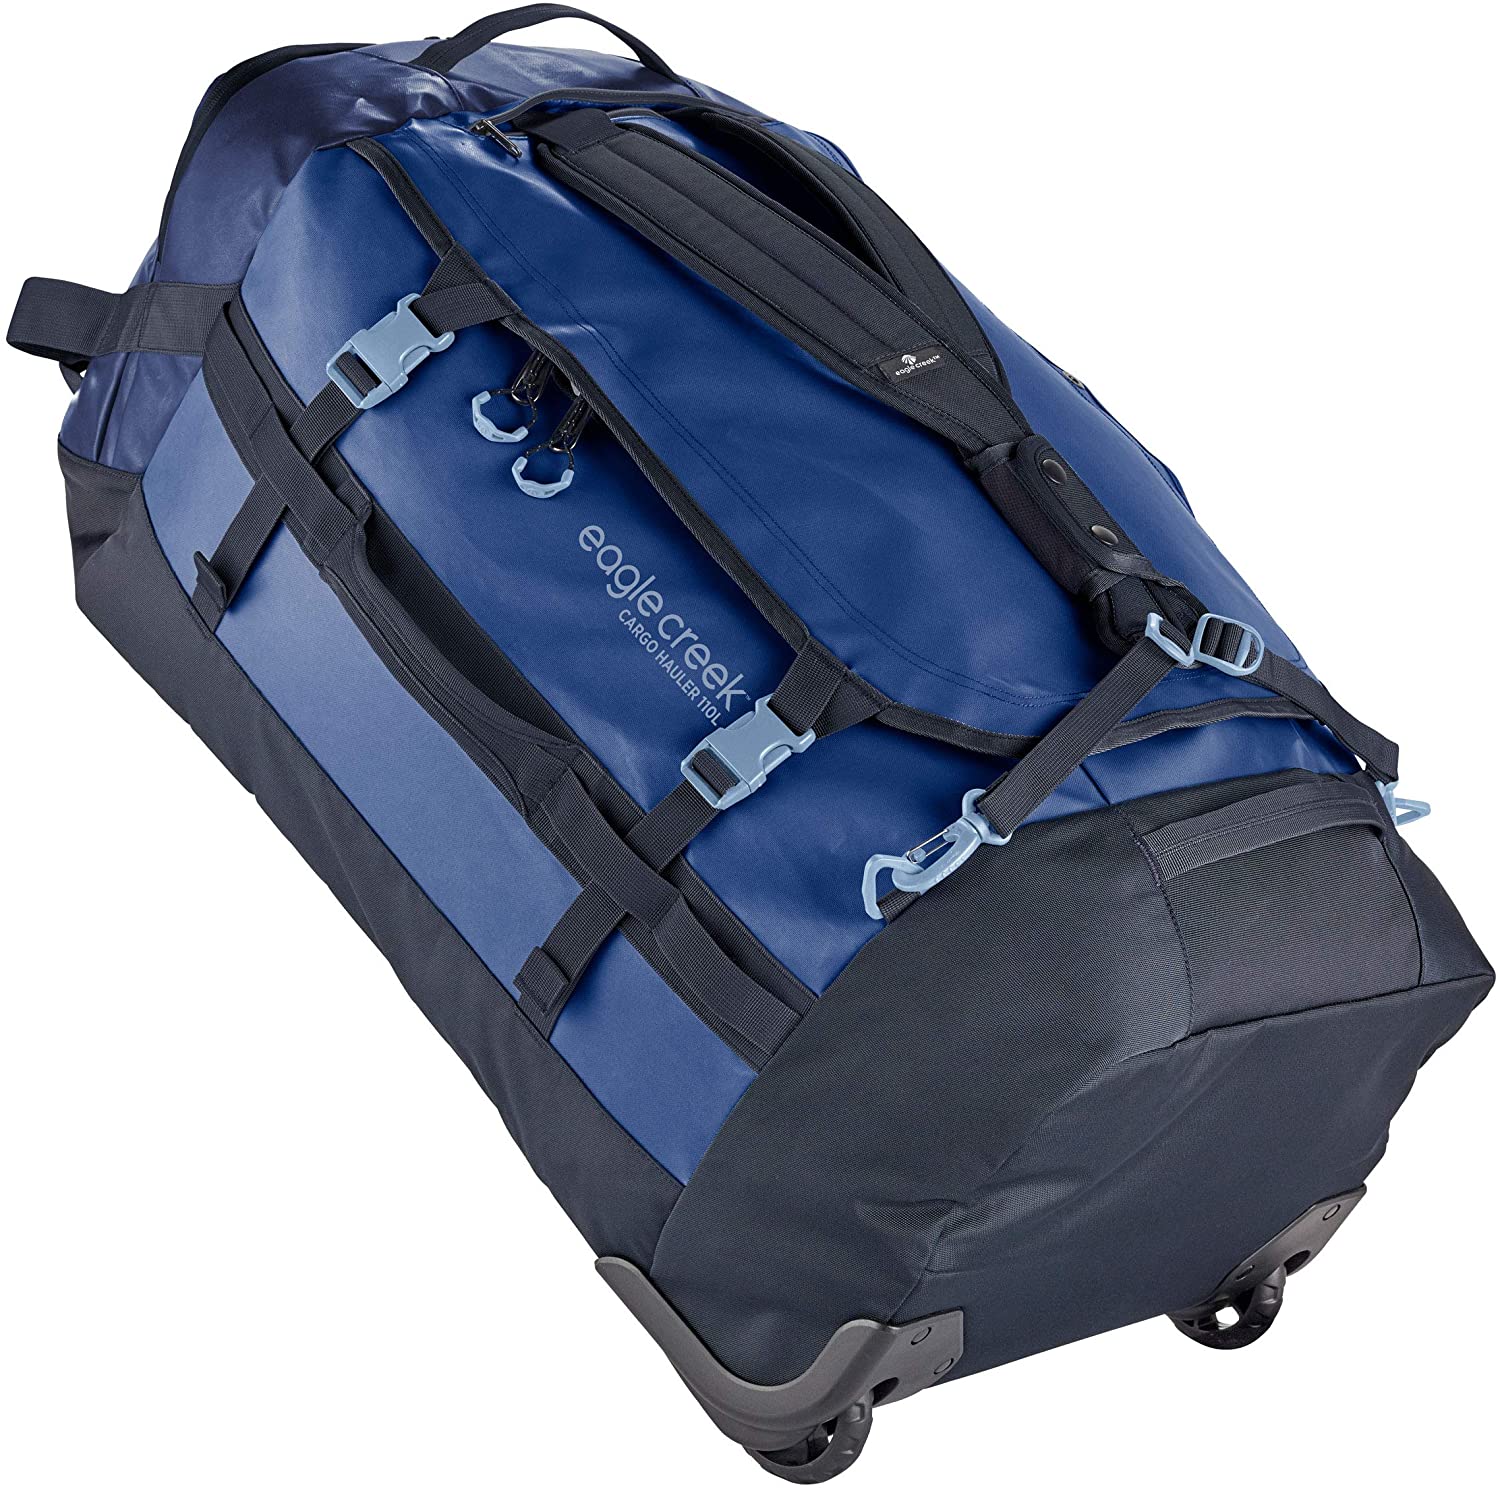 Eagle Creek Cargo Hauler Wheeled Duffel 110L in Arctic Blue color from the front